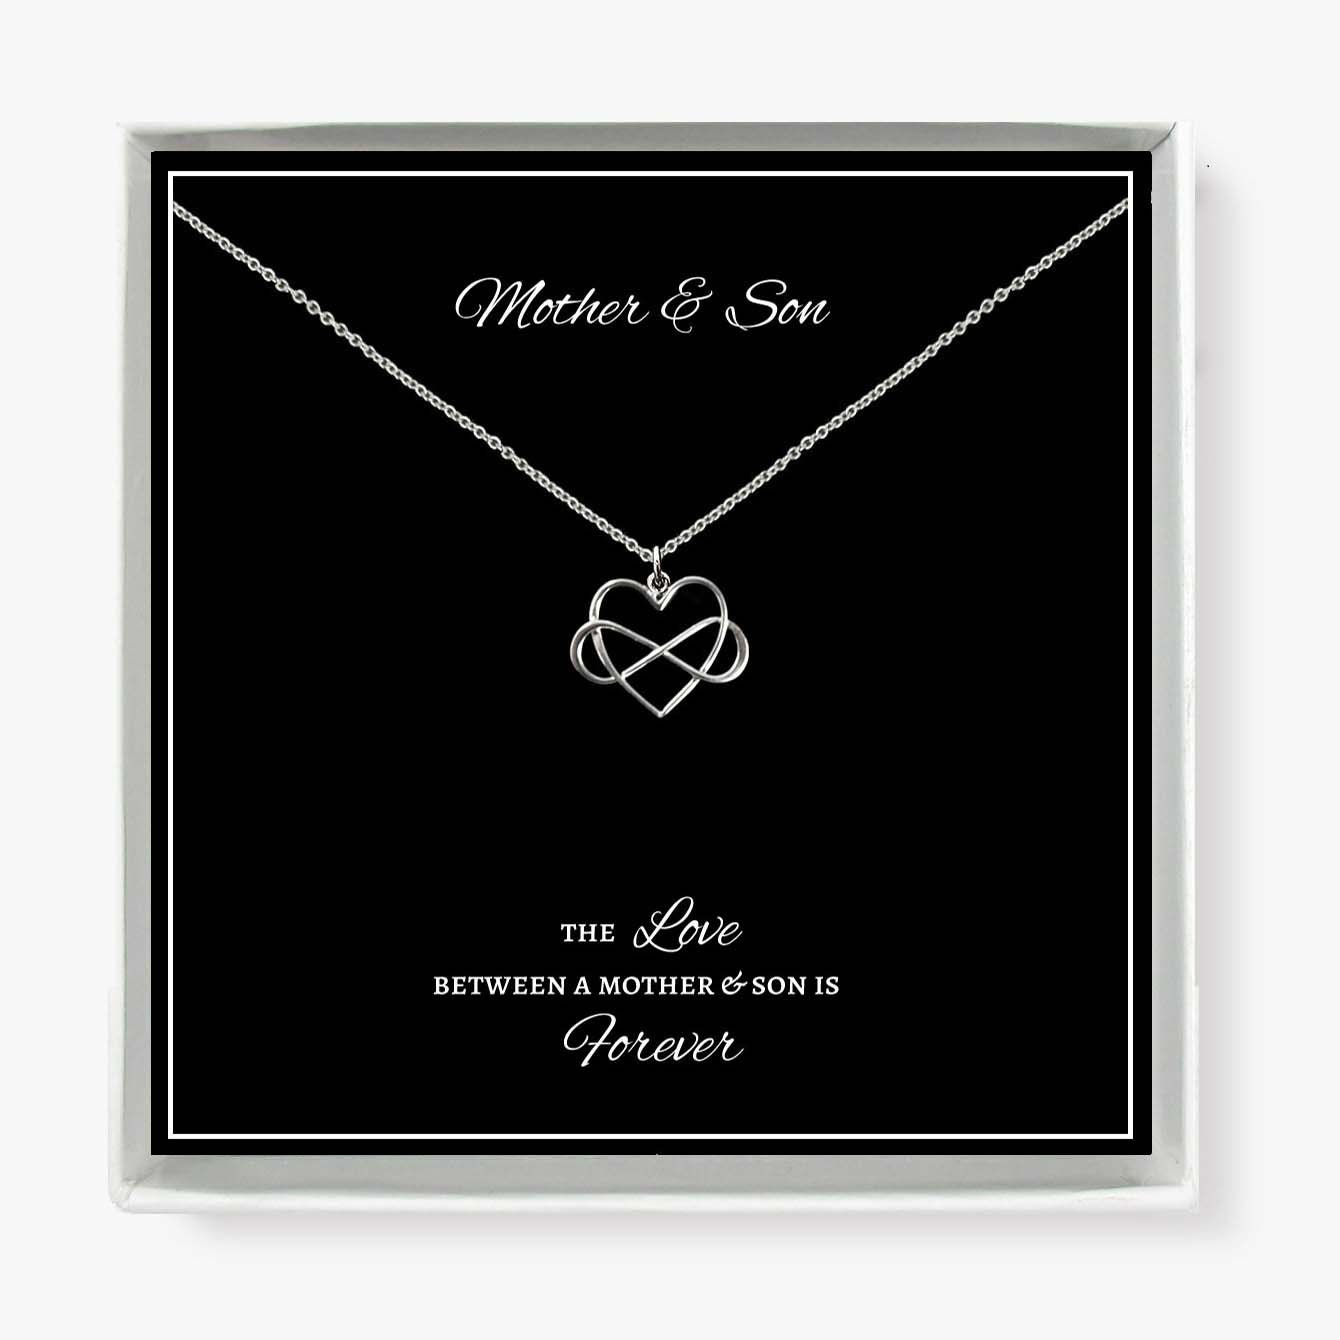 Wedding Infinity Gift from Son Infinity Love Gifts MOTHER of GROOM Gift Mother Son Gift The Love between Mother and Son is Forever Infinity Bracelet from SON to Mom Gift 